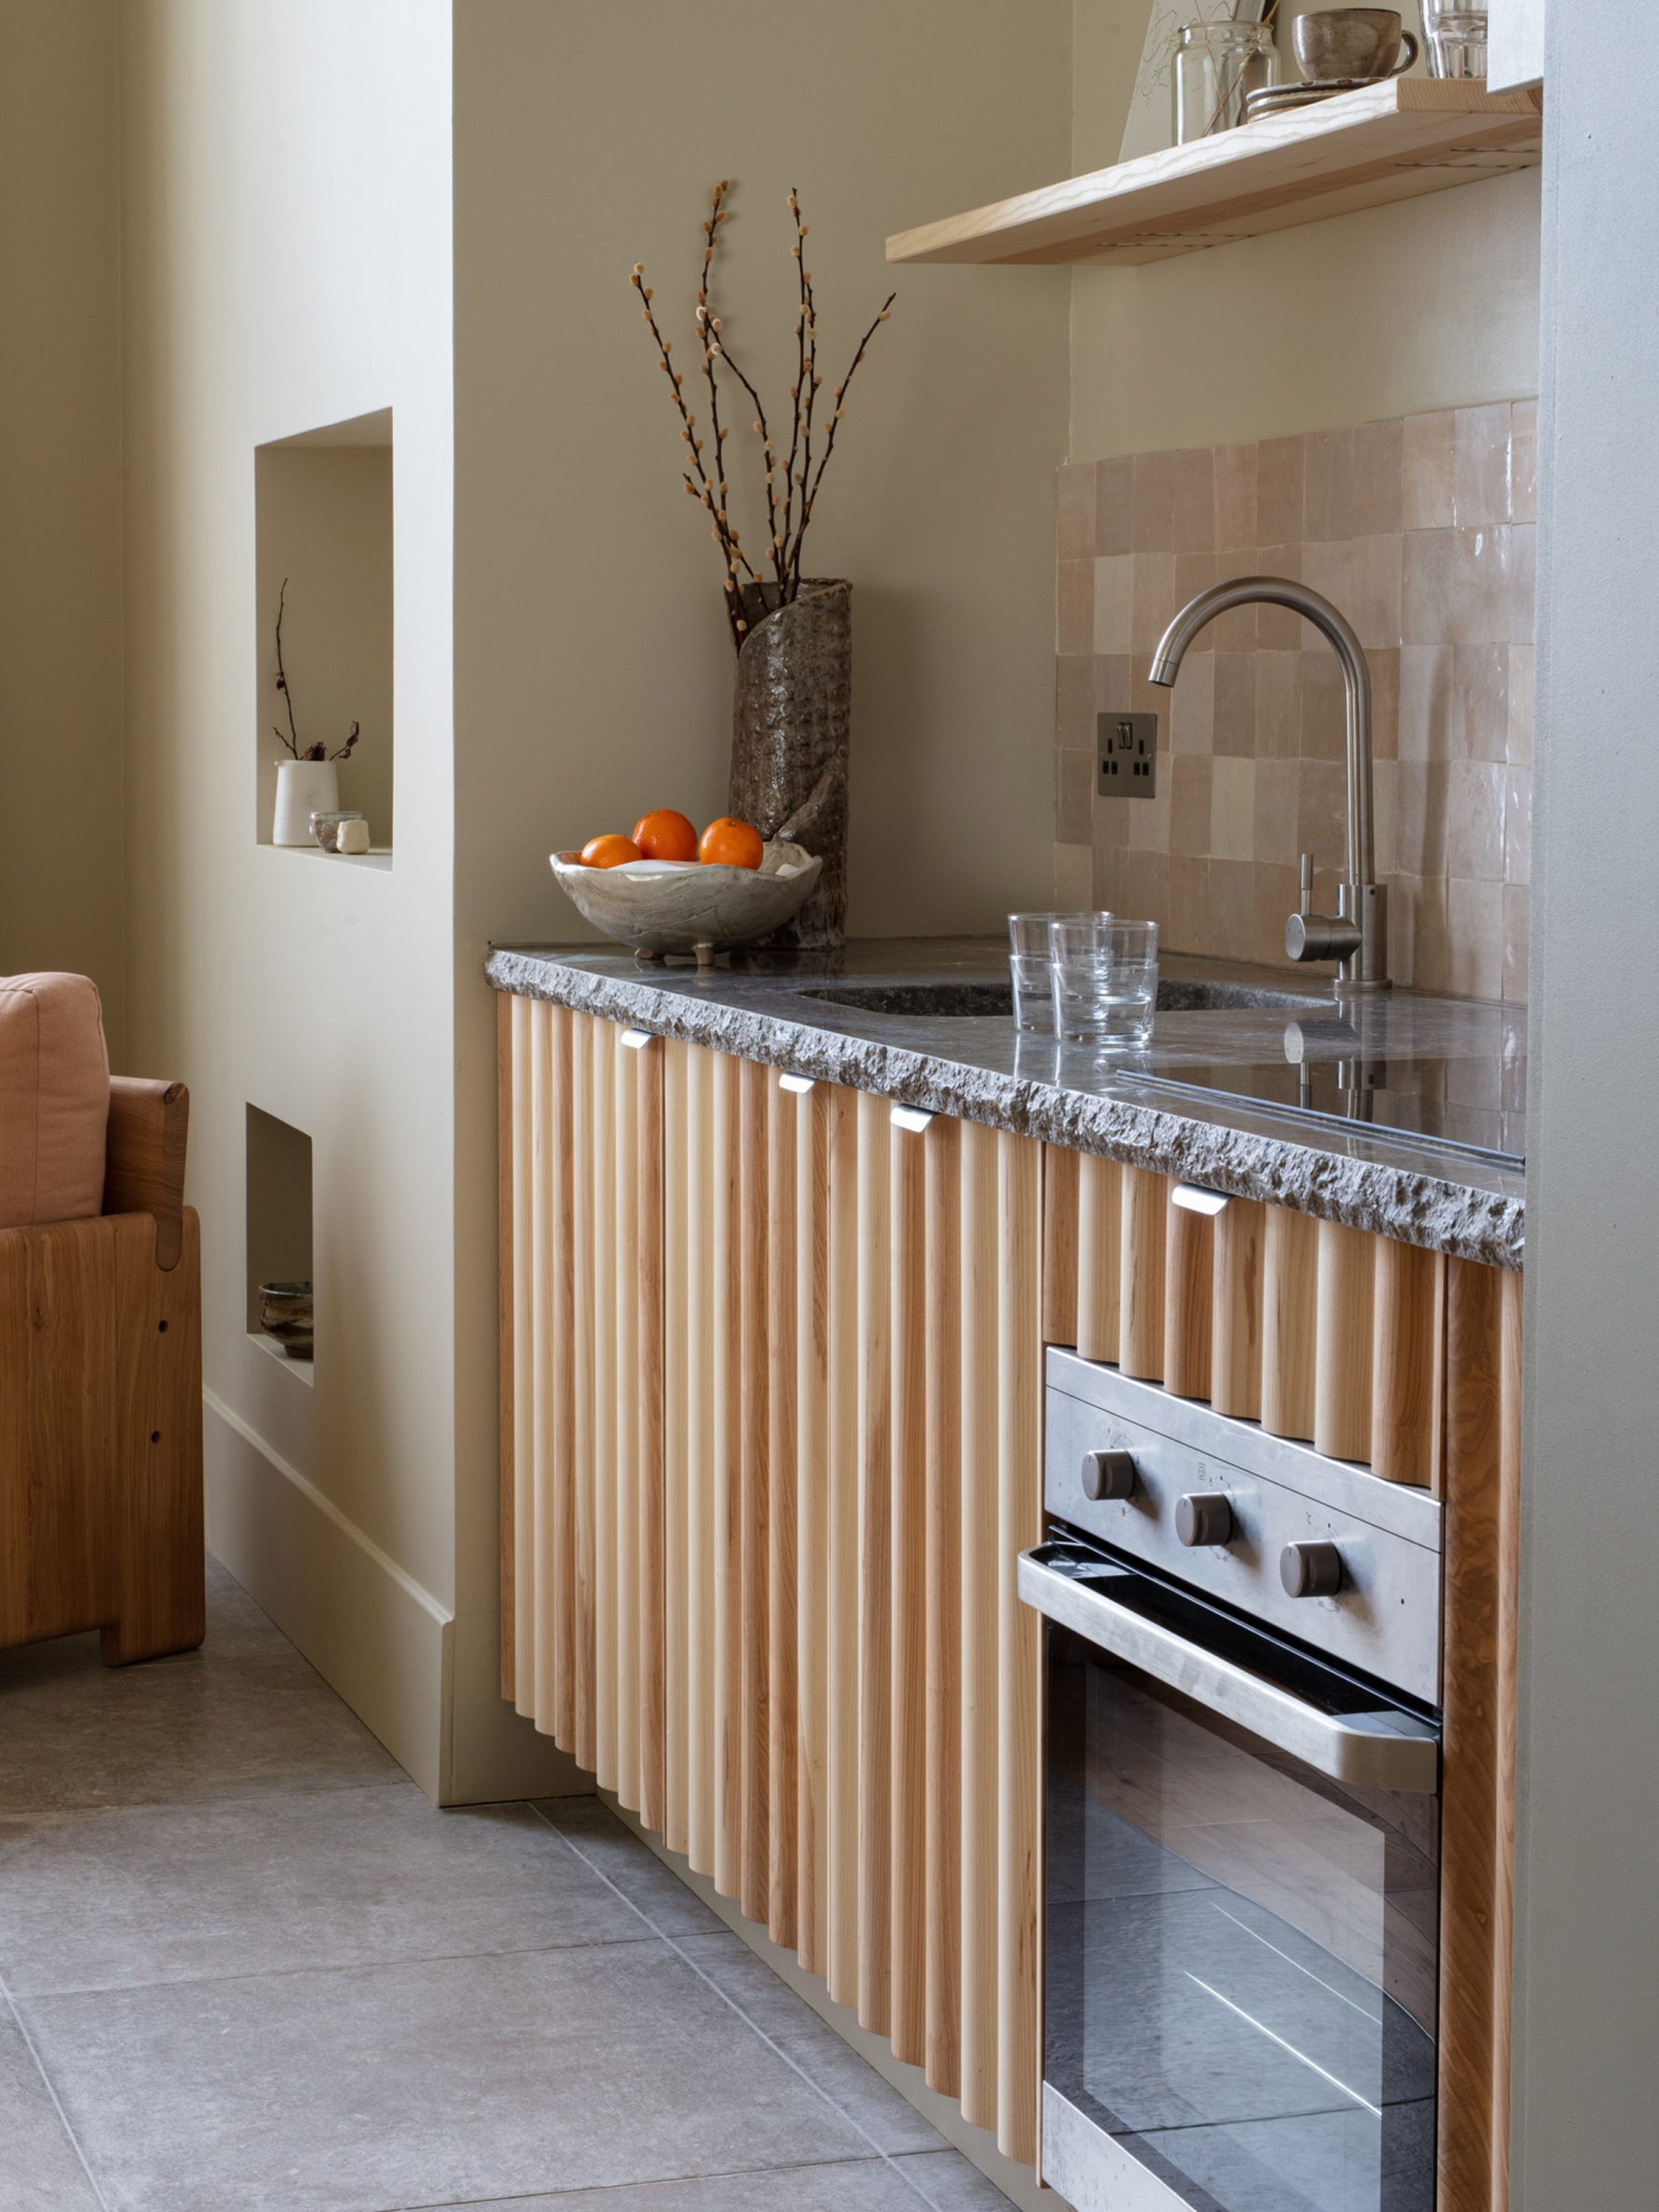 Kitchen with rippled wooden cupboards